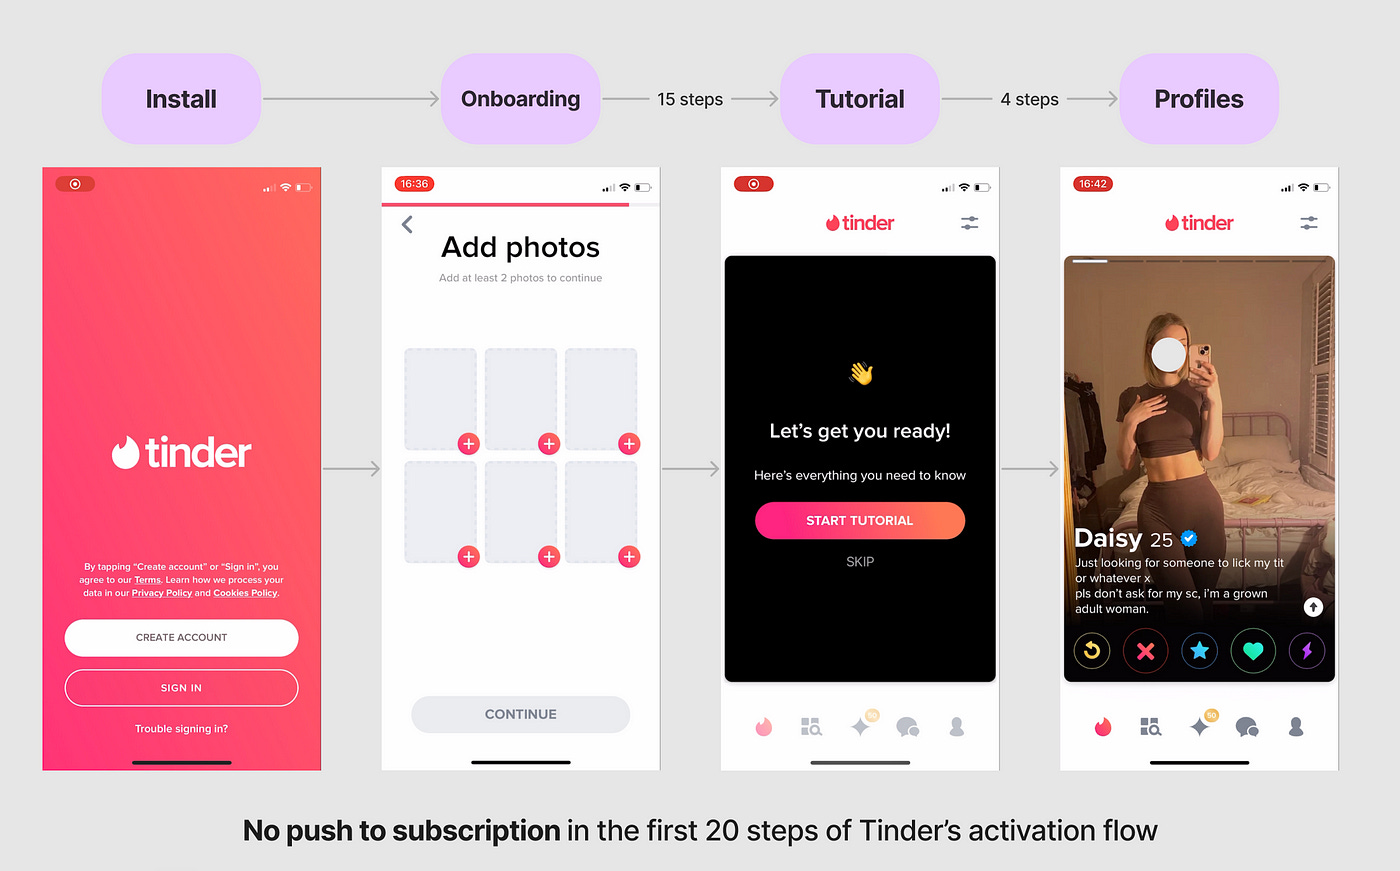 Screenshots showing UX flow of Tinder’s onboarding, and the lack of monetisation in the early flow